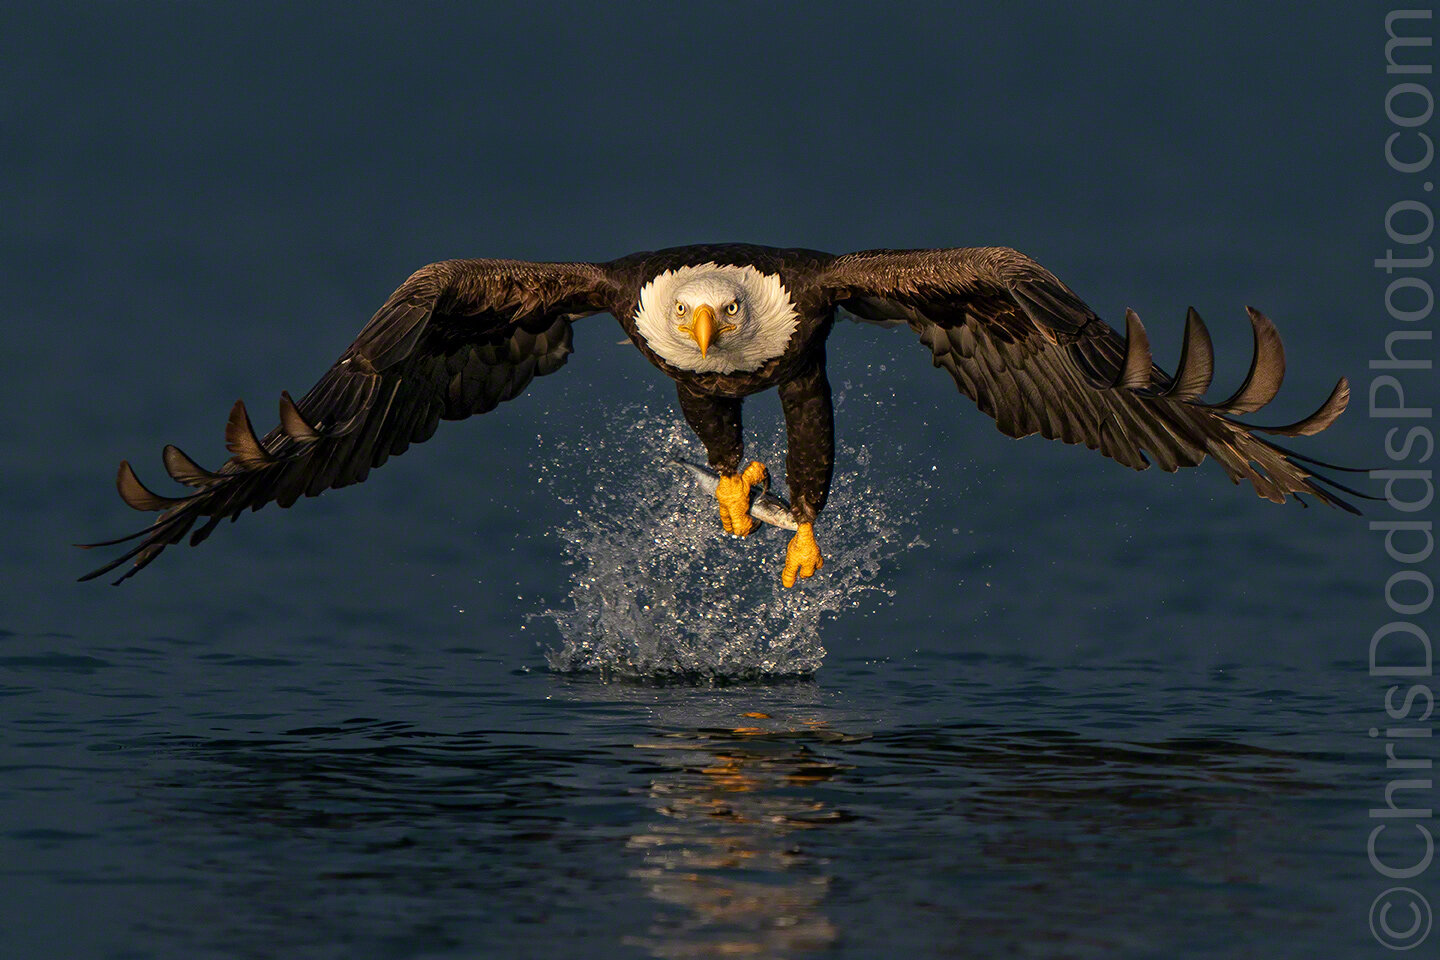 Bald Eagle fishing in golden light — Nature Photography Blog